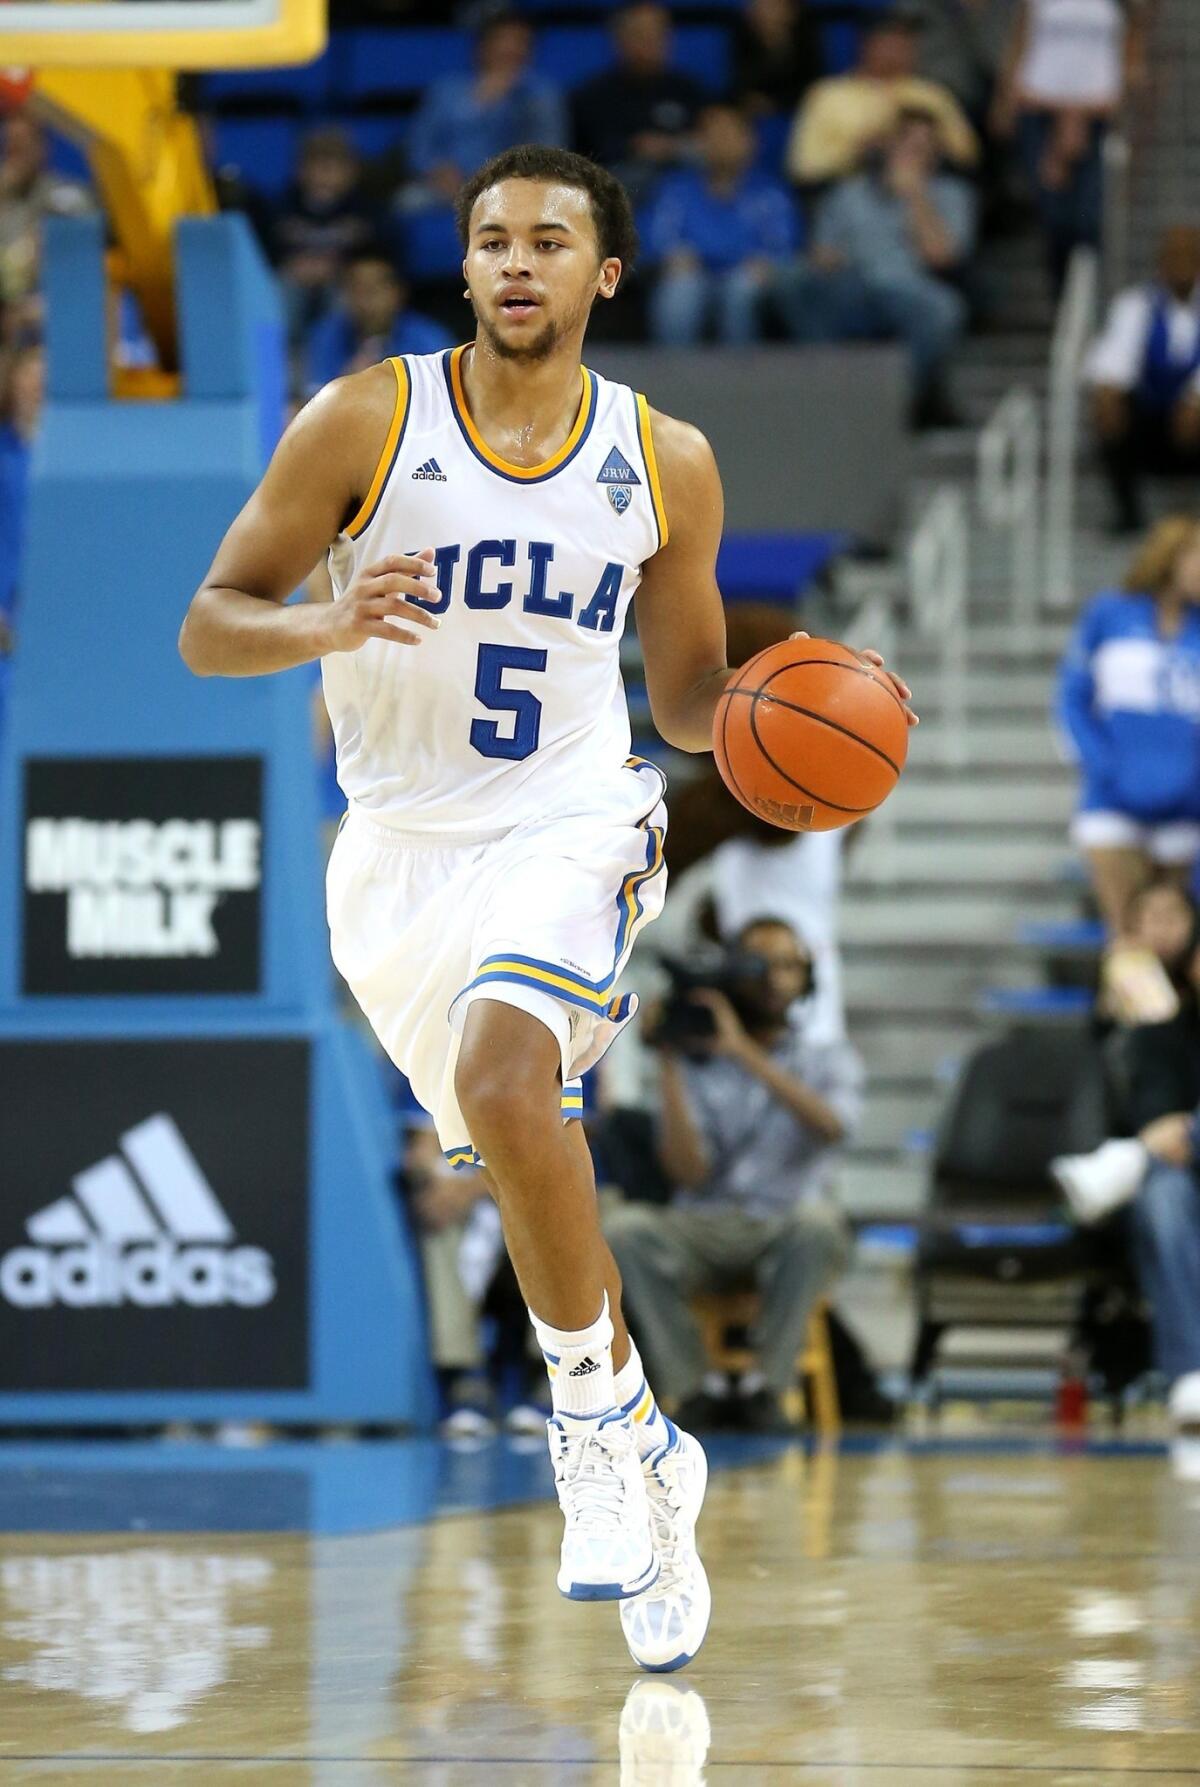 Kyle Anderson and the rest of the Bruins face their toughest test of the young season against Missouri on Saturday.